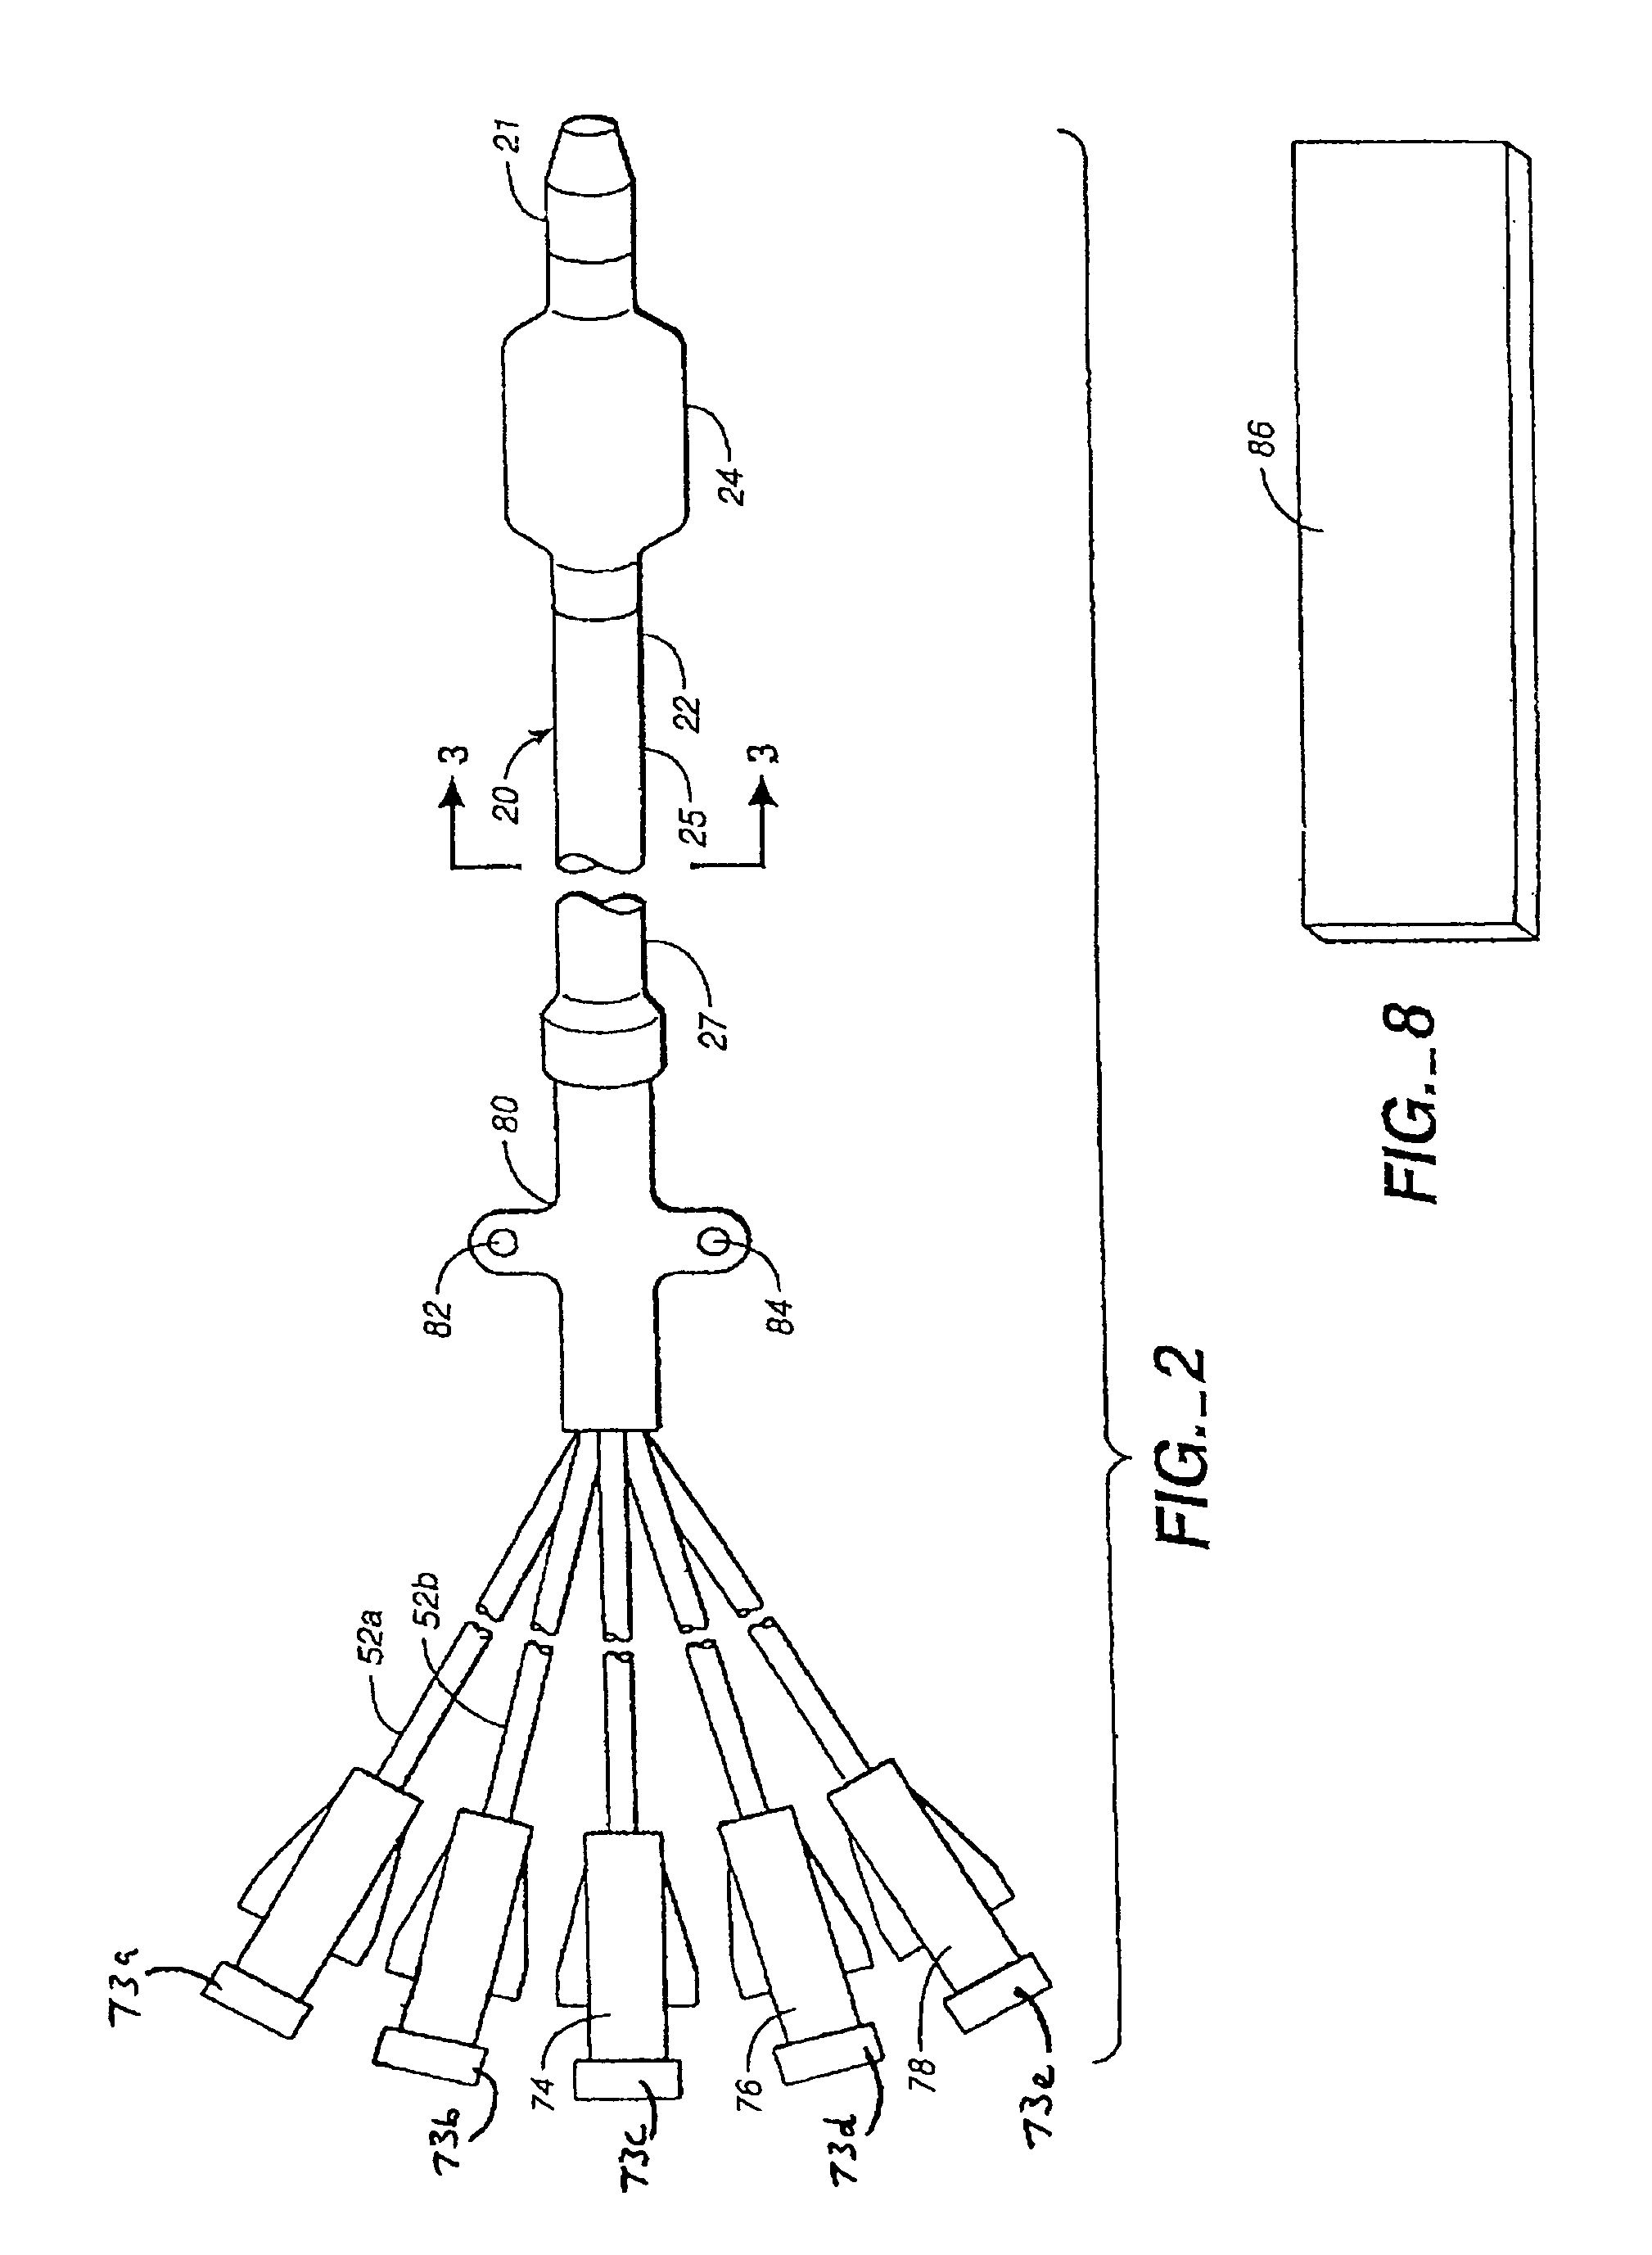 Method for a central venous line catheter having a temperature control system